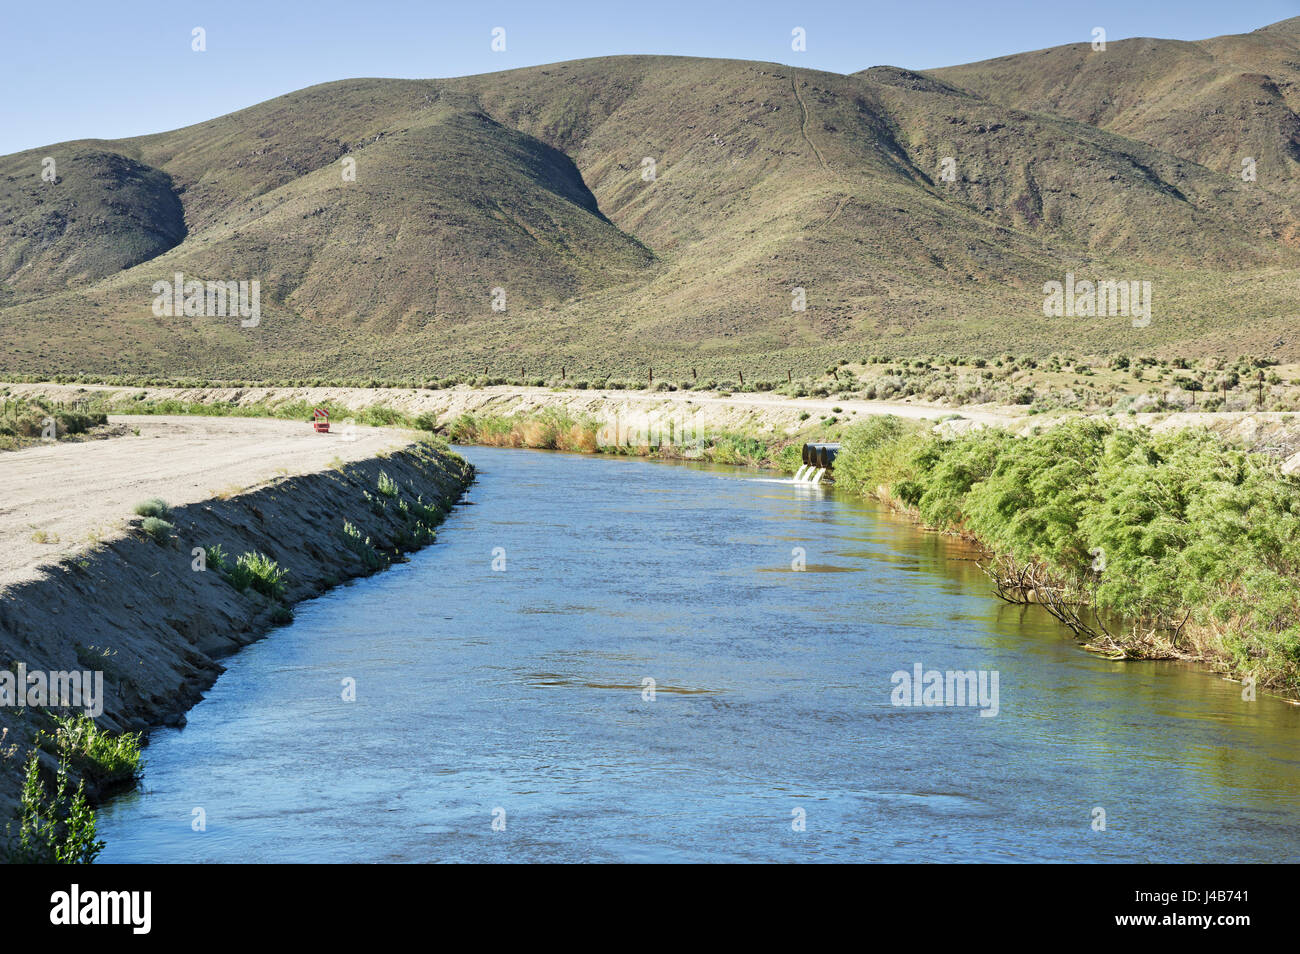 Los Angeles aqueduct in the Owens Valley near the Alabama Hills Stock Photo